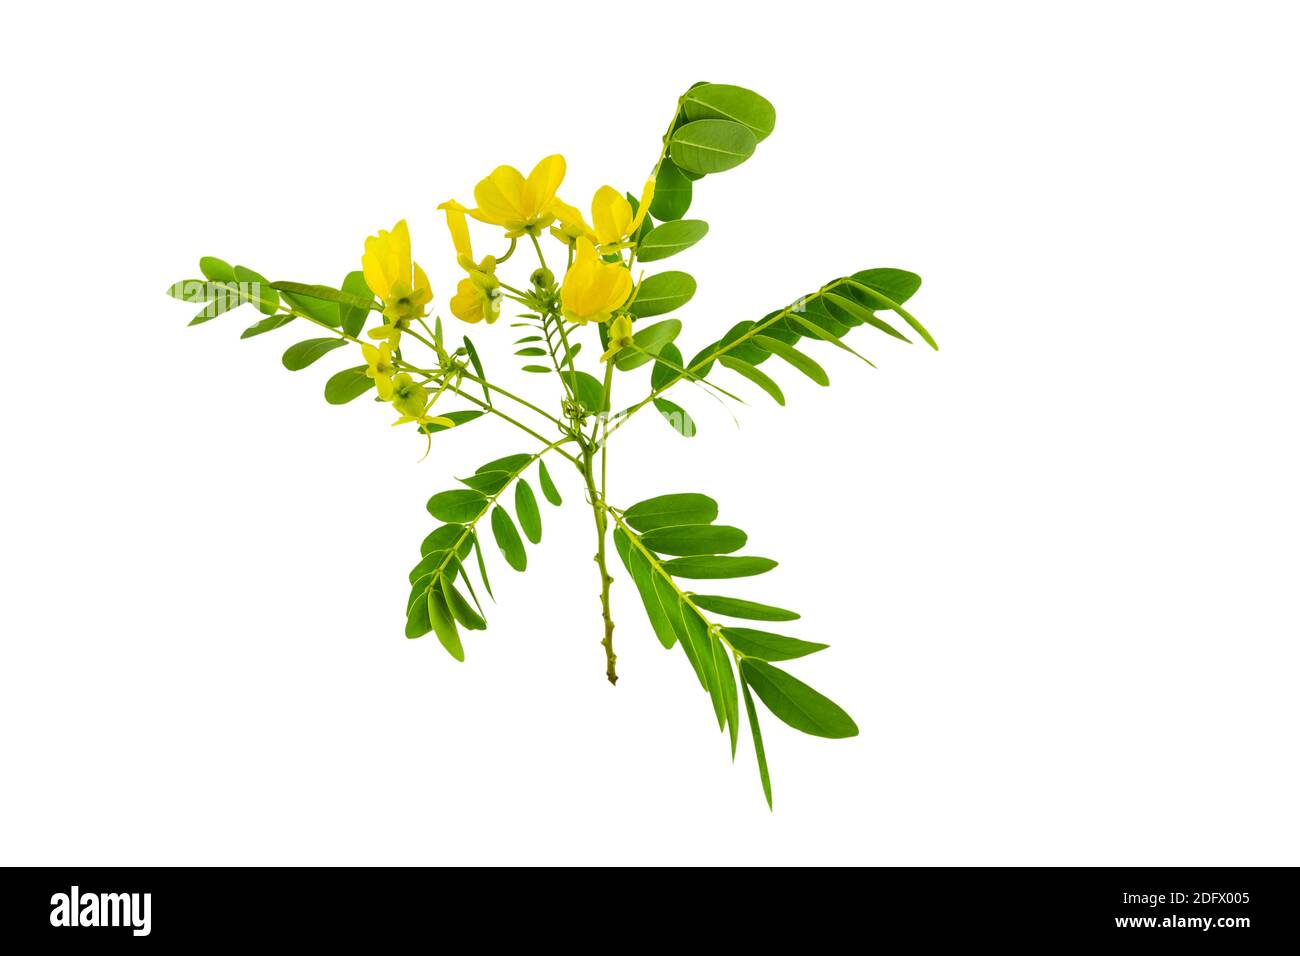 Closed up yellow flower American Cassia or Golden Wonder isolated on white background.Saved with clipping path. Stock Photo